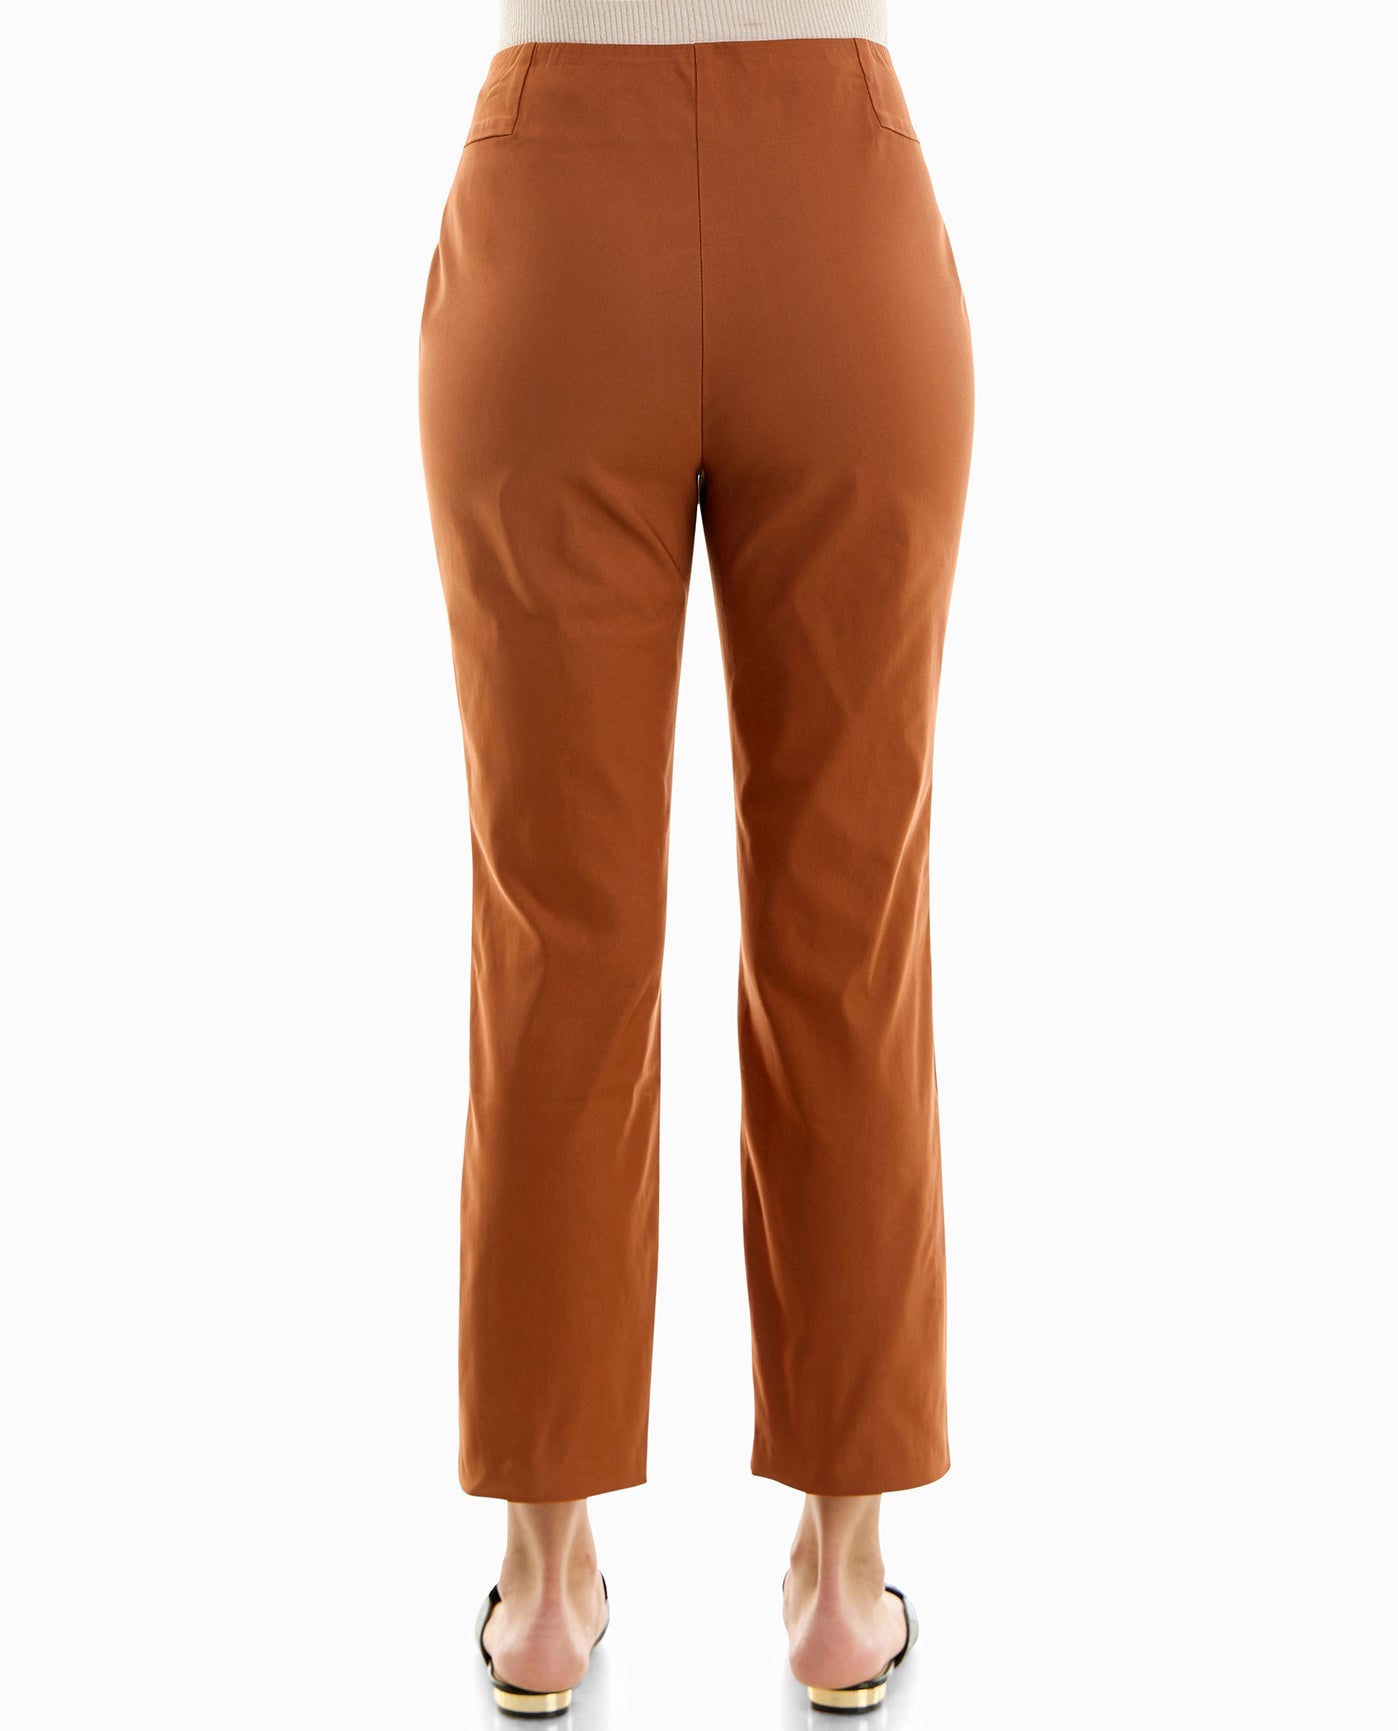 Elasticated Waist Trousers for Elderly Ladies. Pull on Trousers for Older  Women .Short fitting ladies trousers.